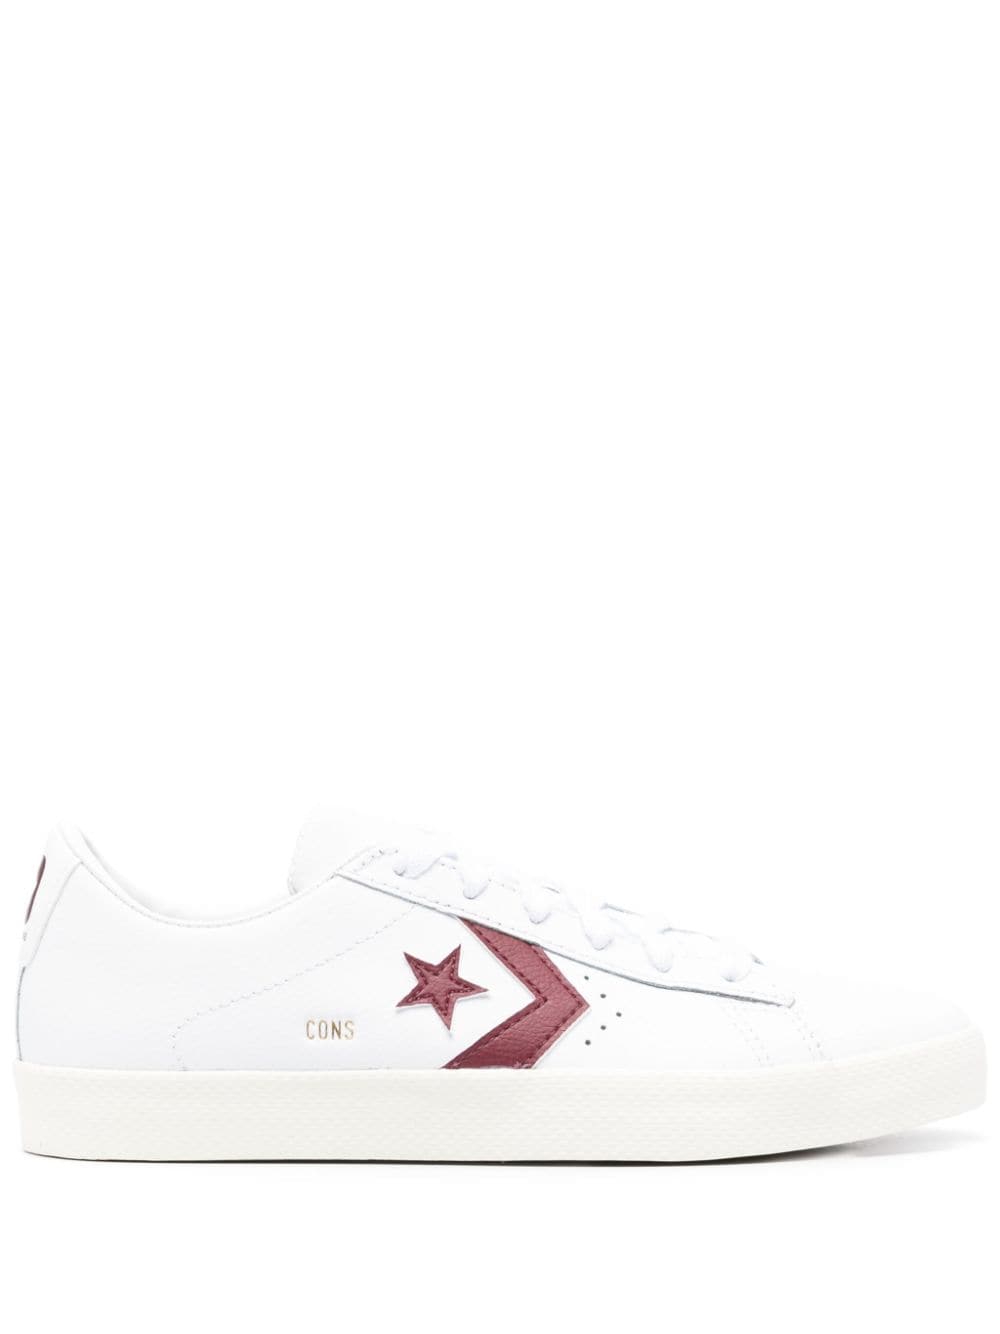 Converse Cons Leather Sneakers In White